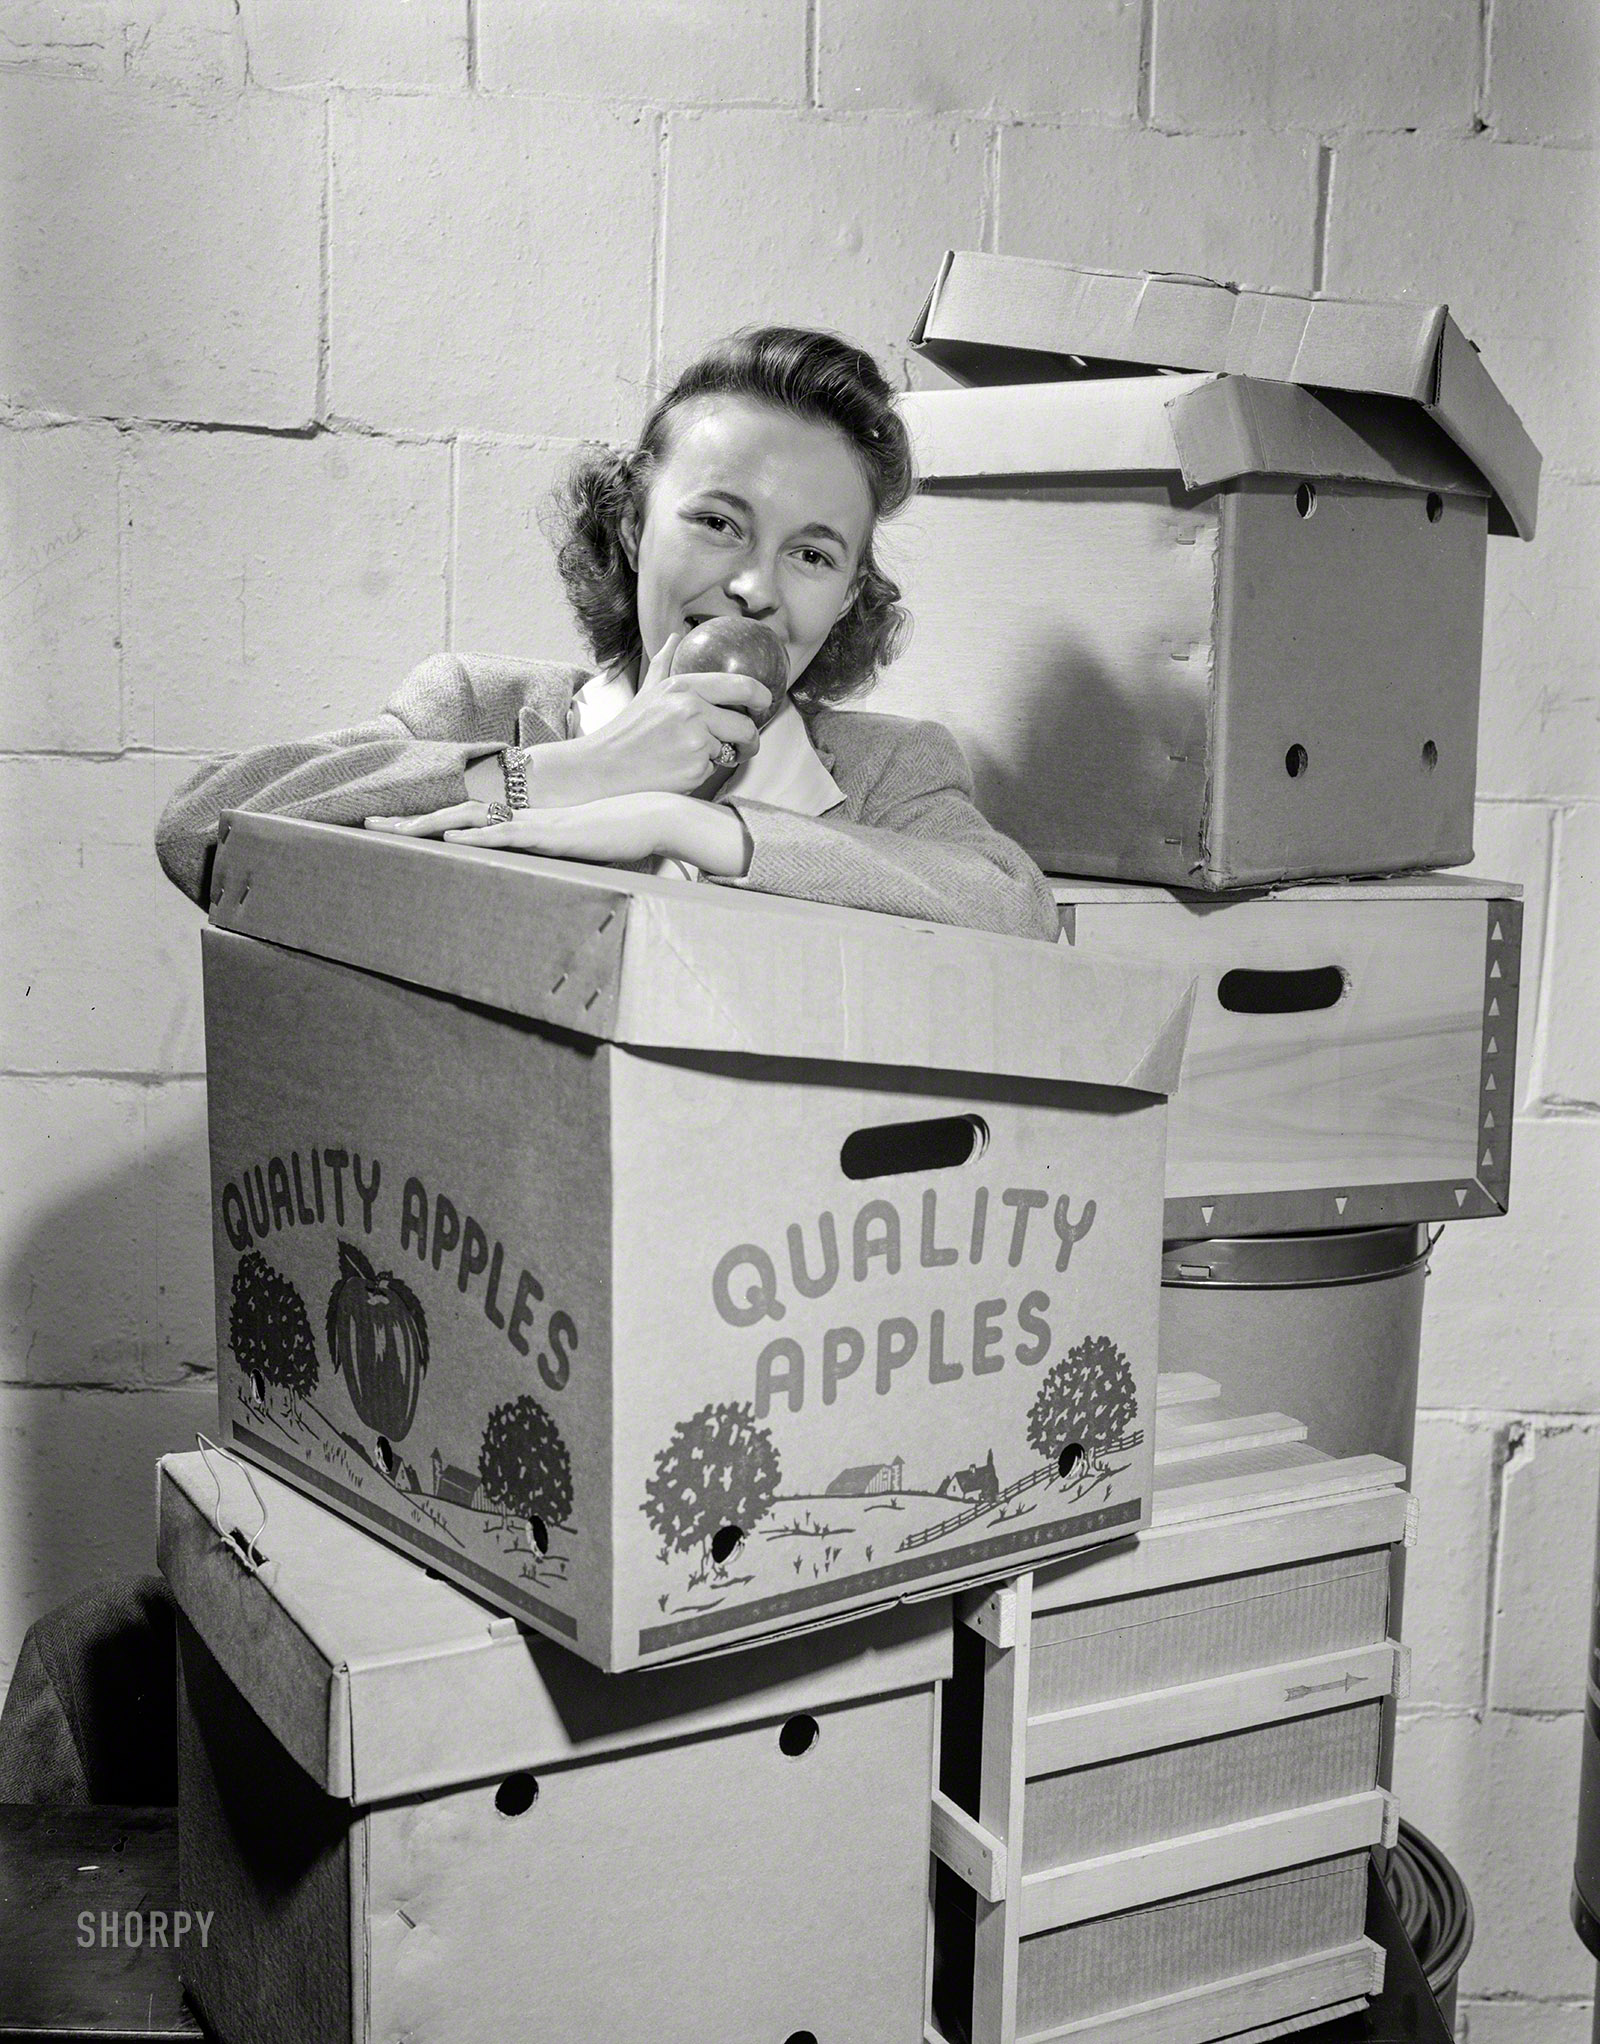 September 1942. "Substitute materials -- something new in apple containers. To replace nail-bound wooden boxes, a fiber carton has been developed." An innovation known today as the cardboard box. Medium format nitrate negative by William Perlitch for the Office of War Information. View full size.